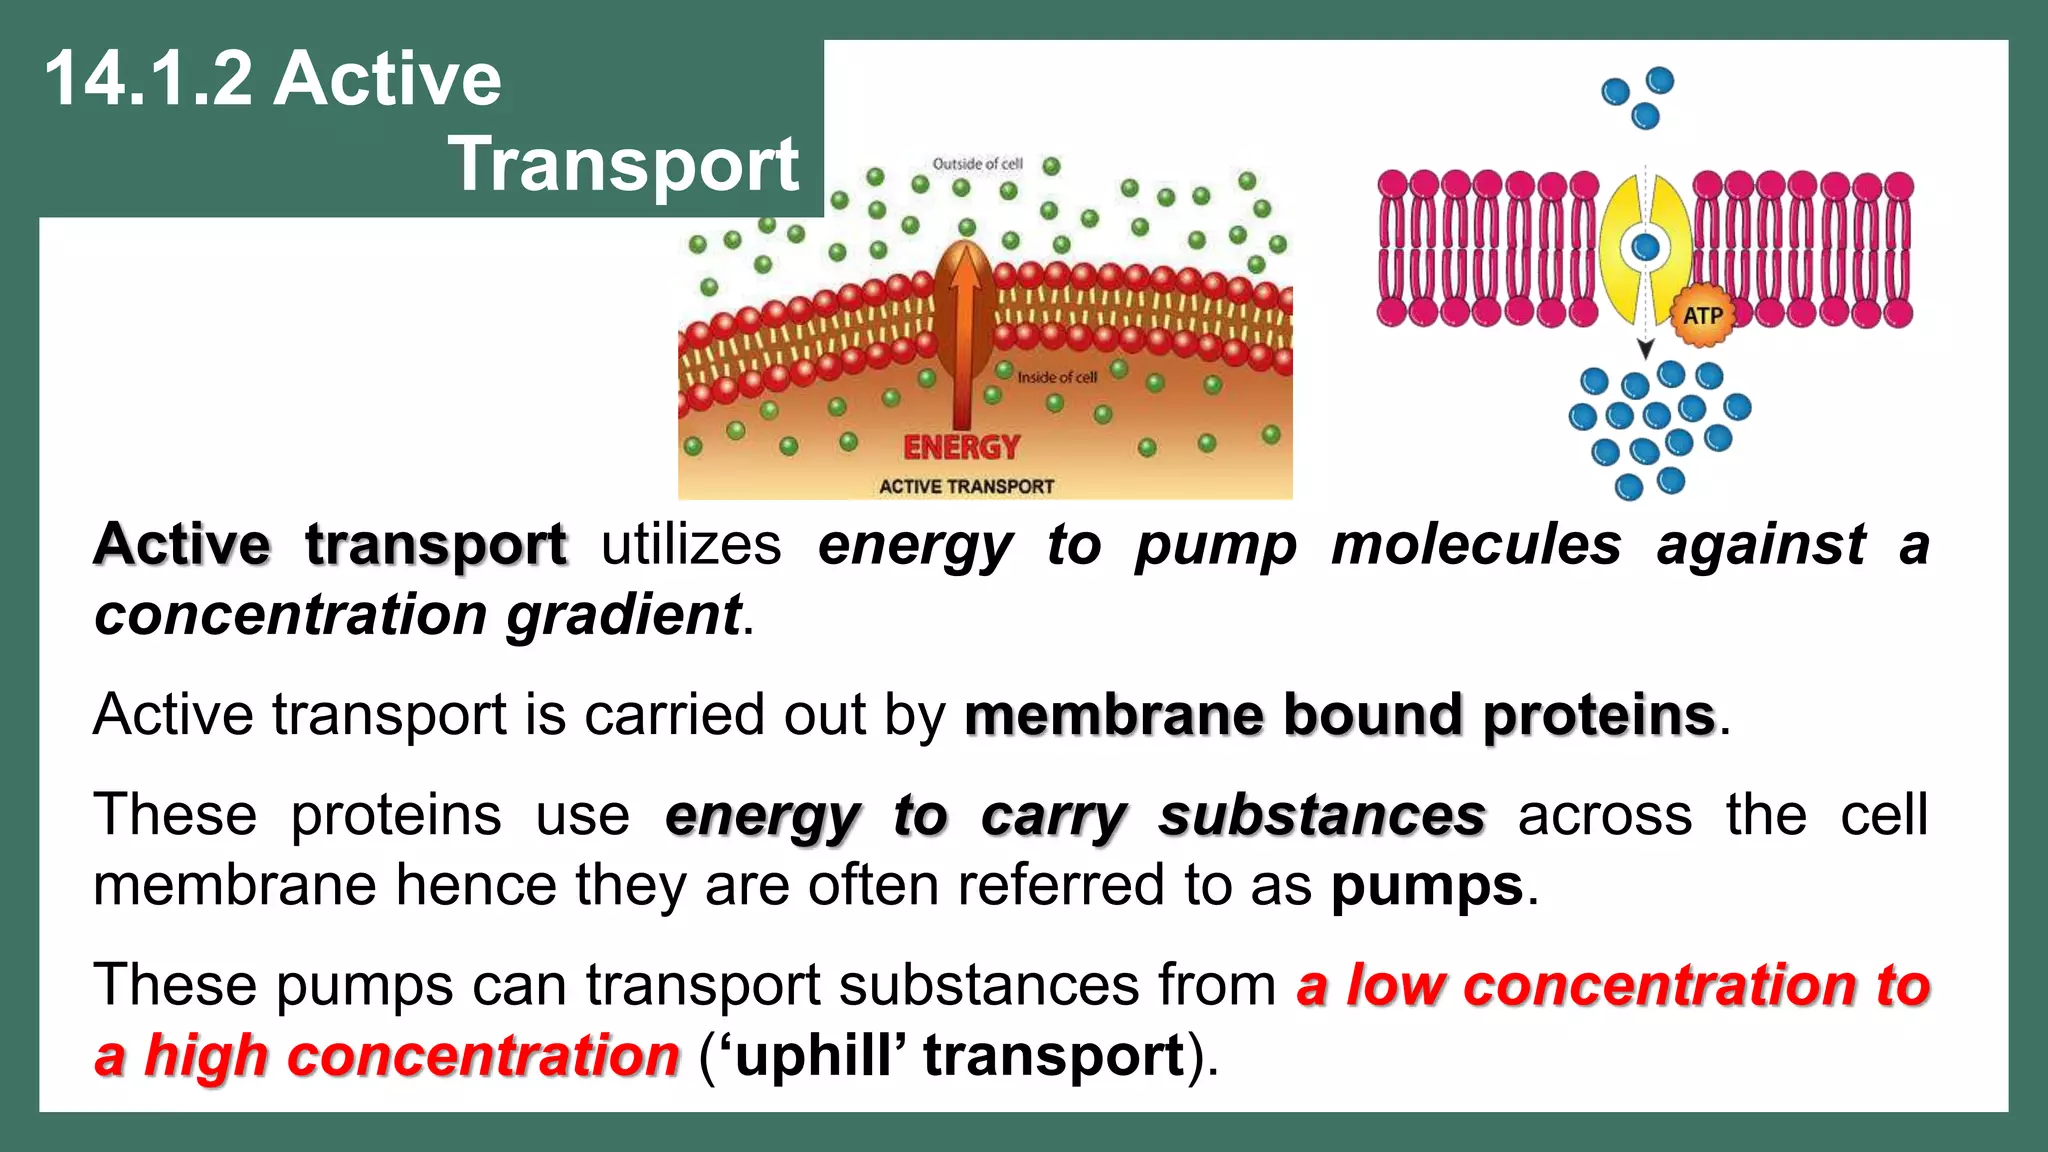 TRANSPORTATION IN PLANTS AND CIRCULATION IN 